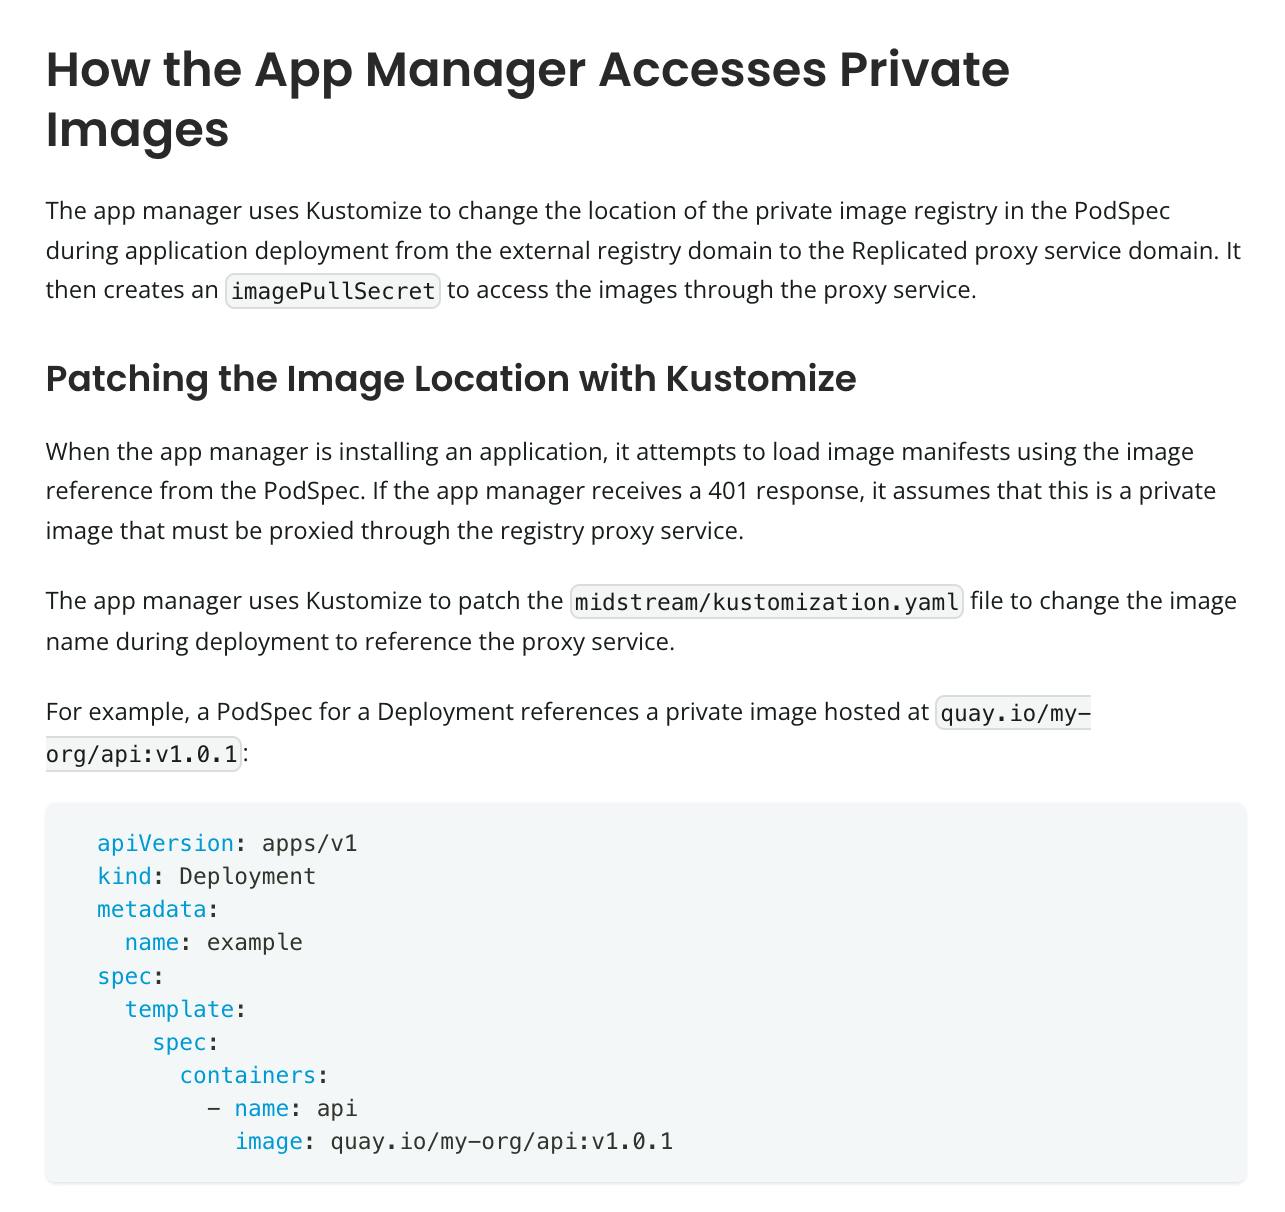 App Manager accesses private images